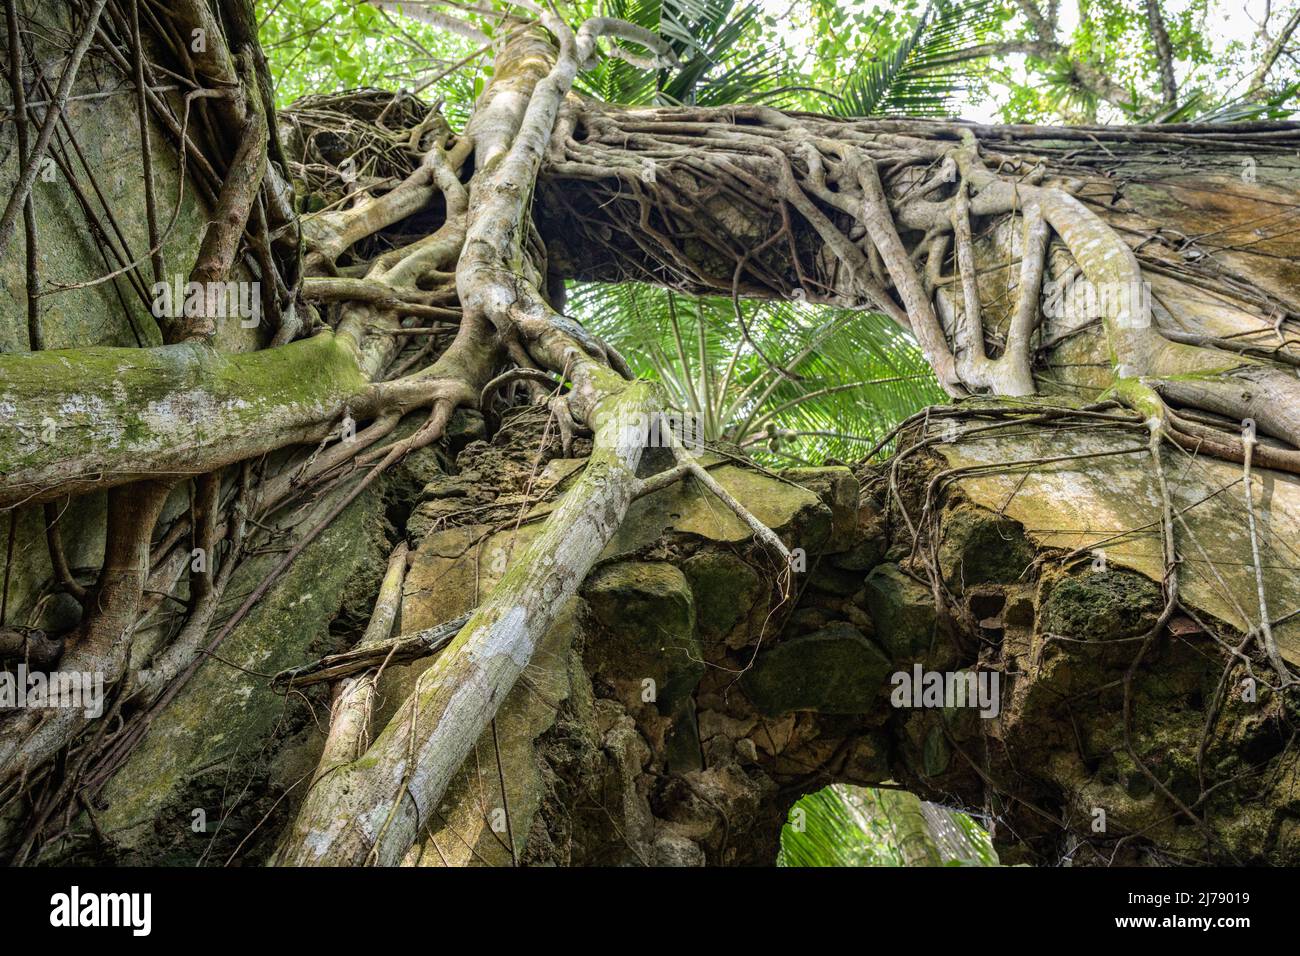 Tropical vegetation growing on the ruins of an old colonial building. Stock Photo